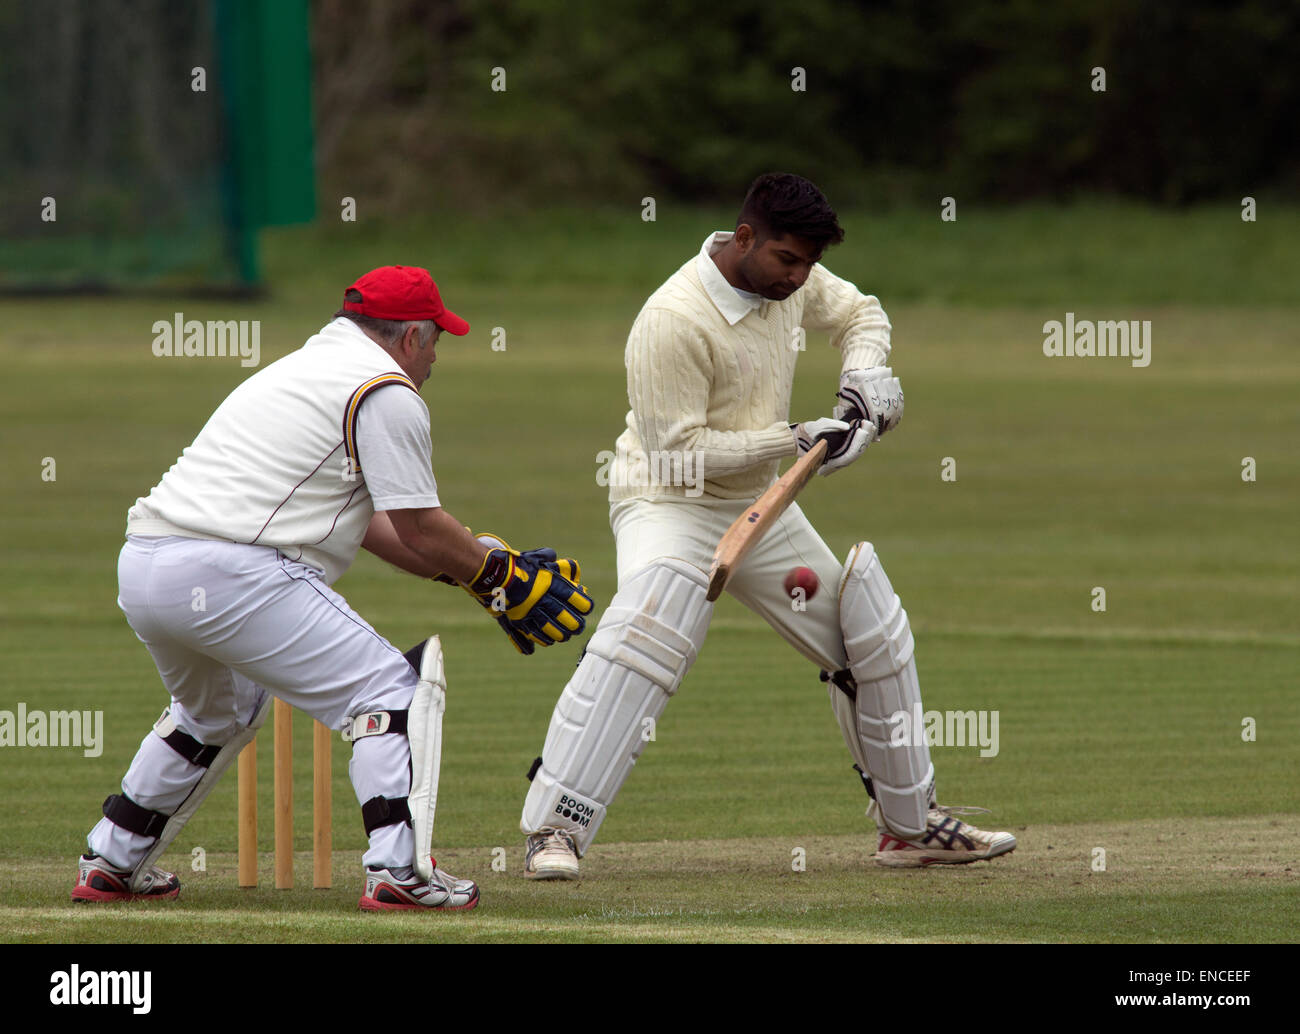 Bearley, Warwicks, UK. 2nd May, 2015. On the opening day of the 2015 Cotswold Hills Cricket League, Alvechurch bat against the home team Bearley in a Division 6 fixture. Credit:  Colin Underhill/Alamy Live News Stock Photo